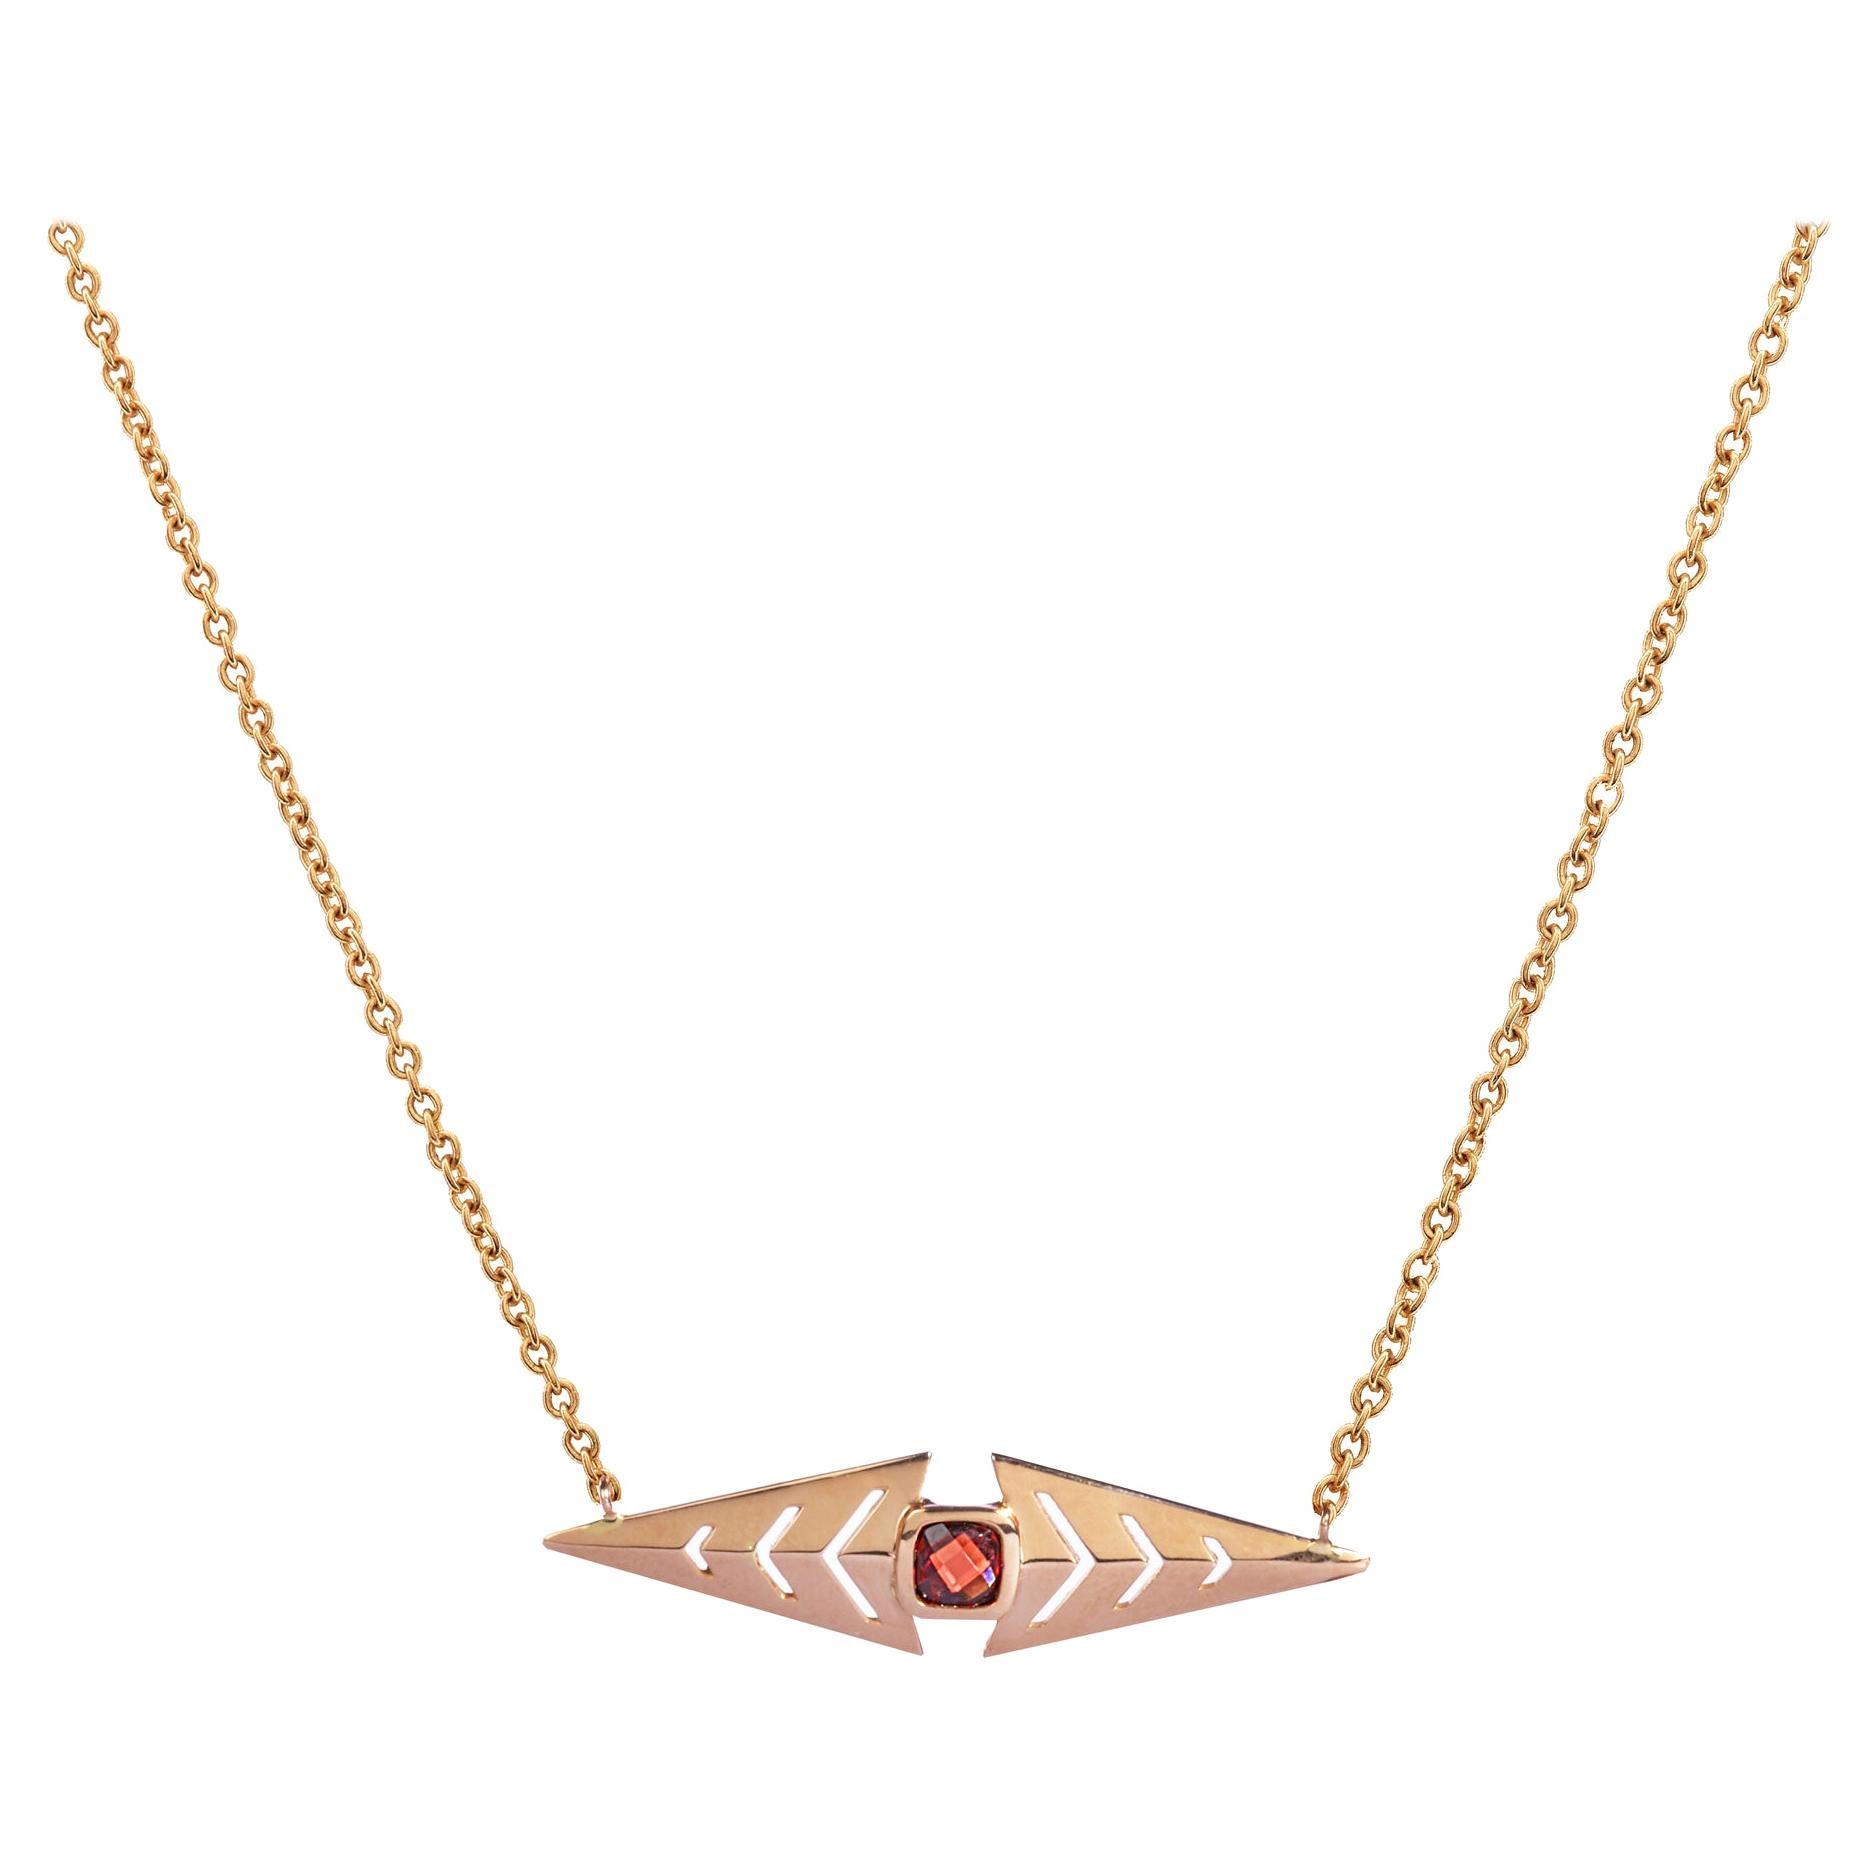 18 Karat Rose Gold with Garnet Cushion Cut Sign Necklace.Sustainable Fine Jewel For Sale